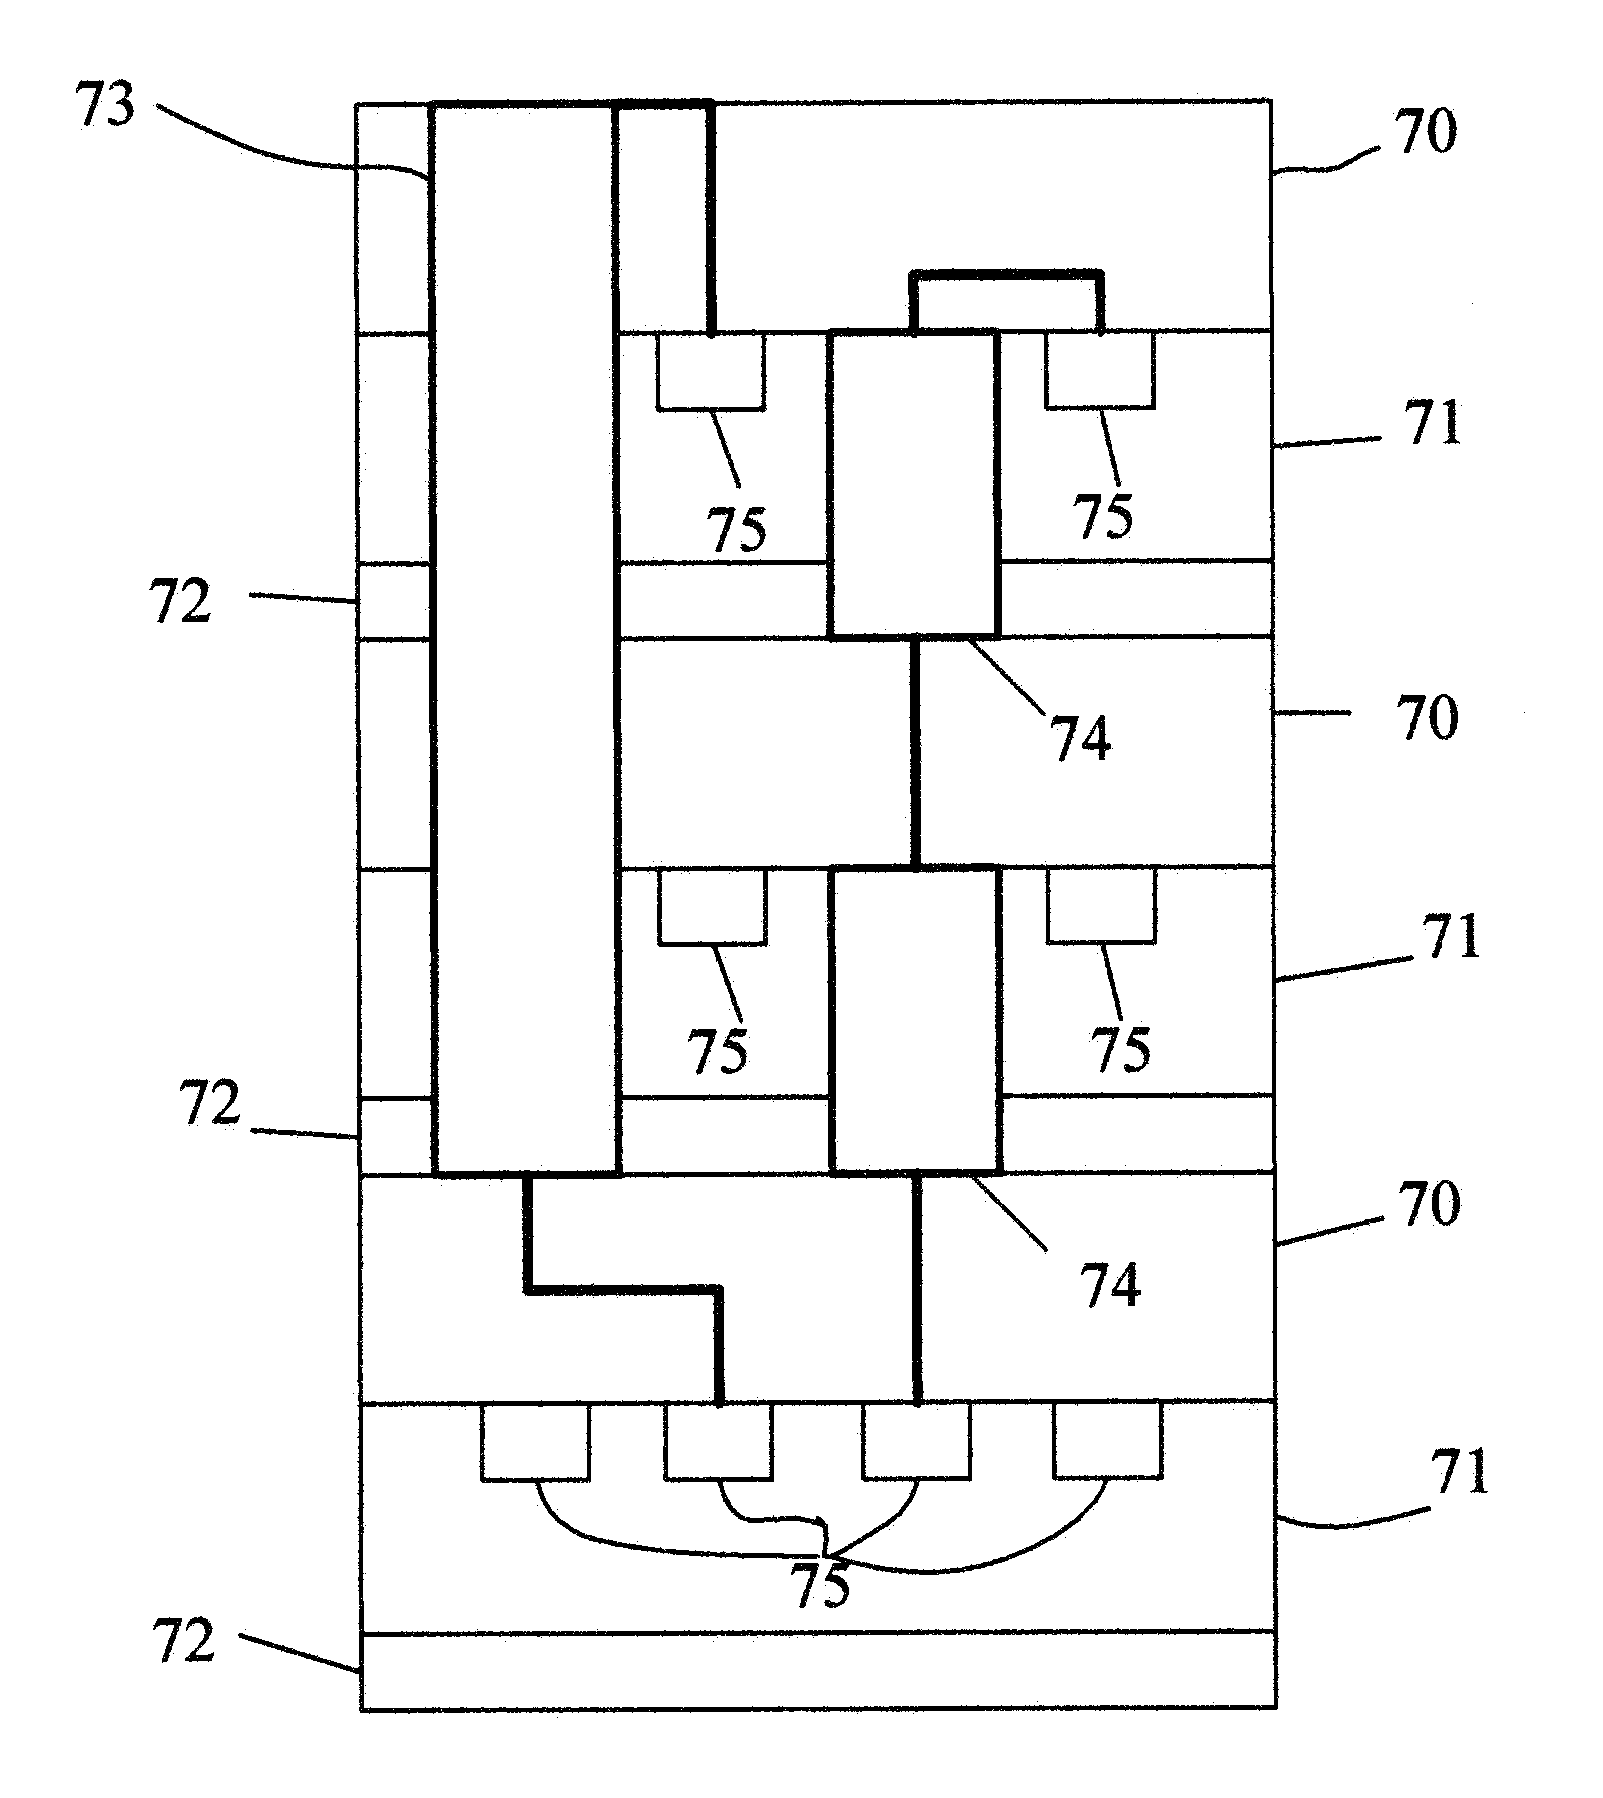 Method of analytical placement with weighted-average wirelength model